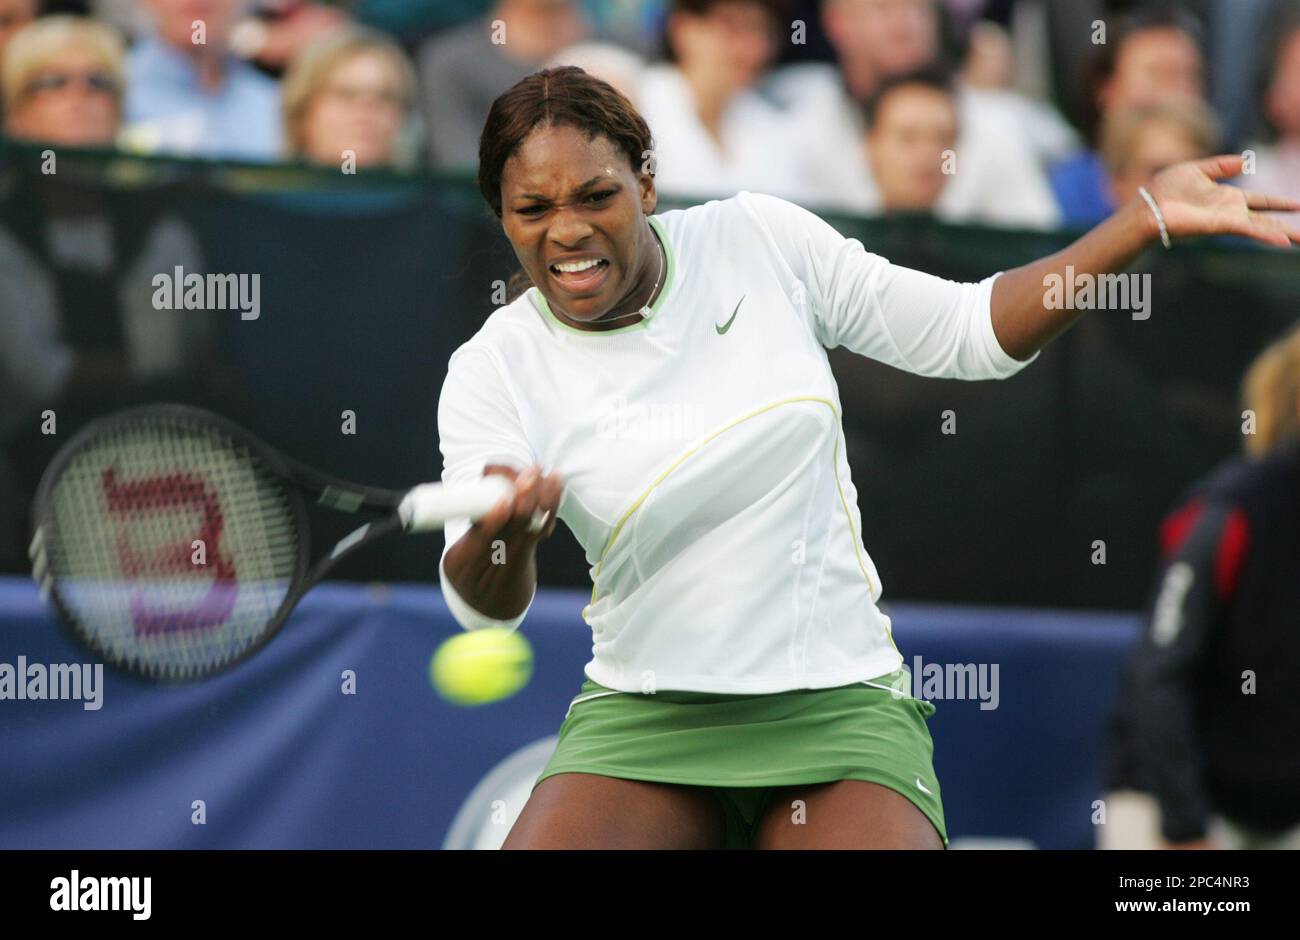 America's Serena Williams in action against Austria's Sybille Bammer in the  quarter finals of the Hobart International tennis tournament, Wed, Jan. 10,  2007, in Hobart Australia. Bammer won the match 3-6, 7-5,